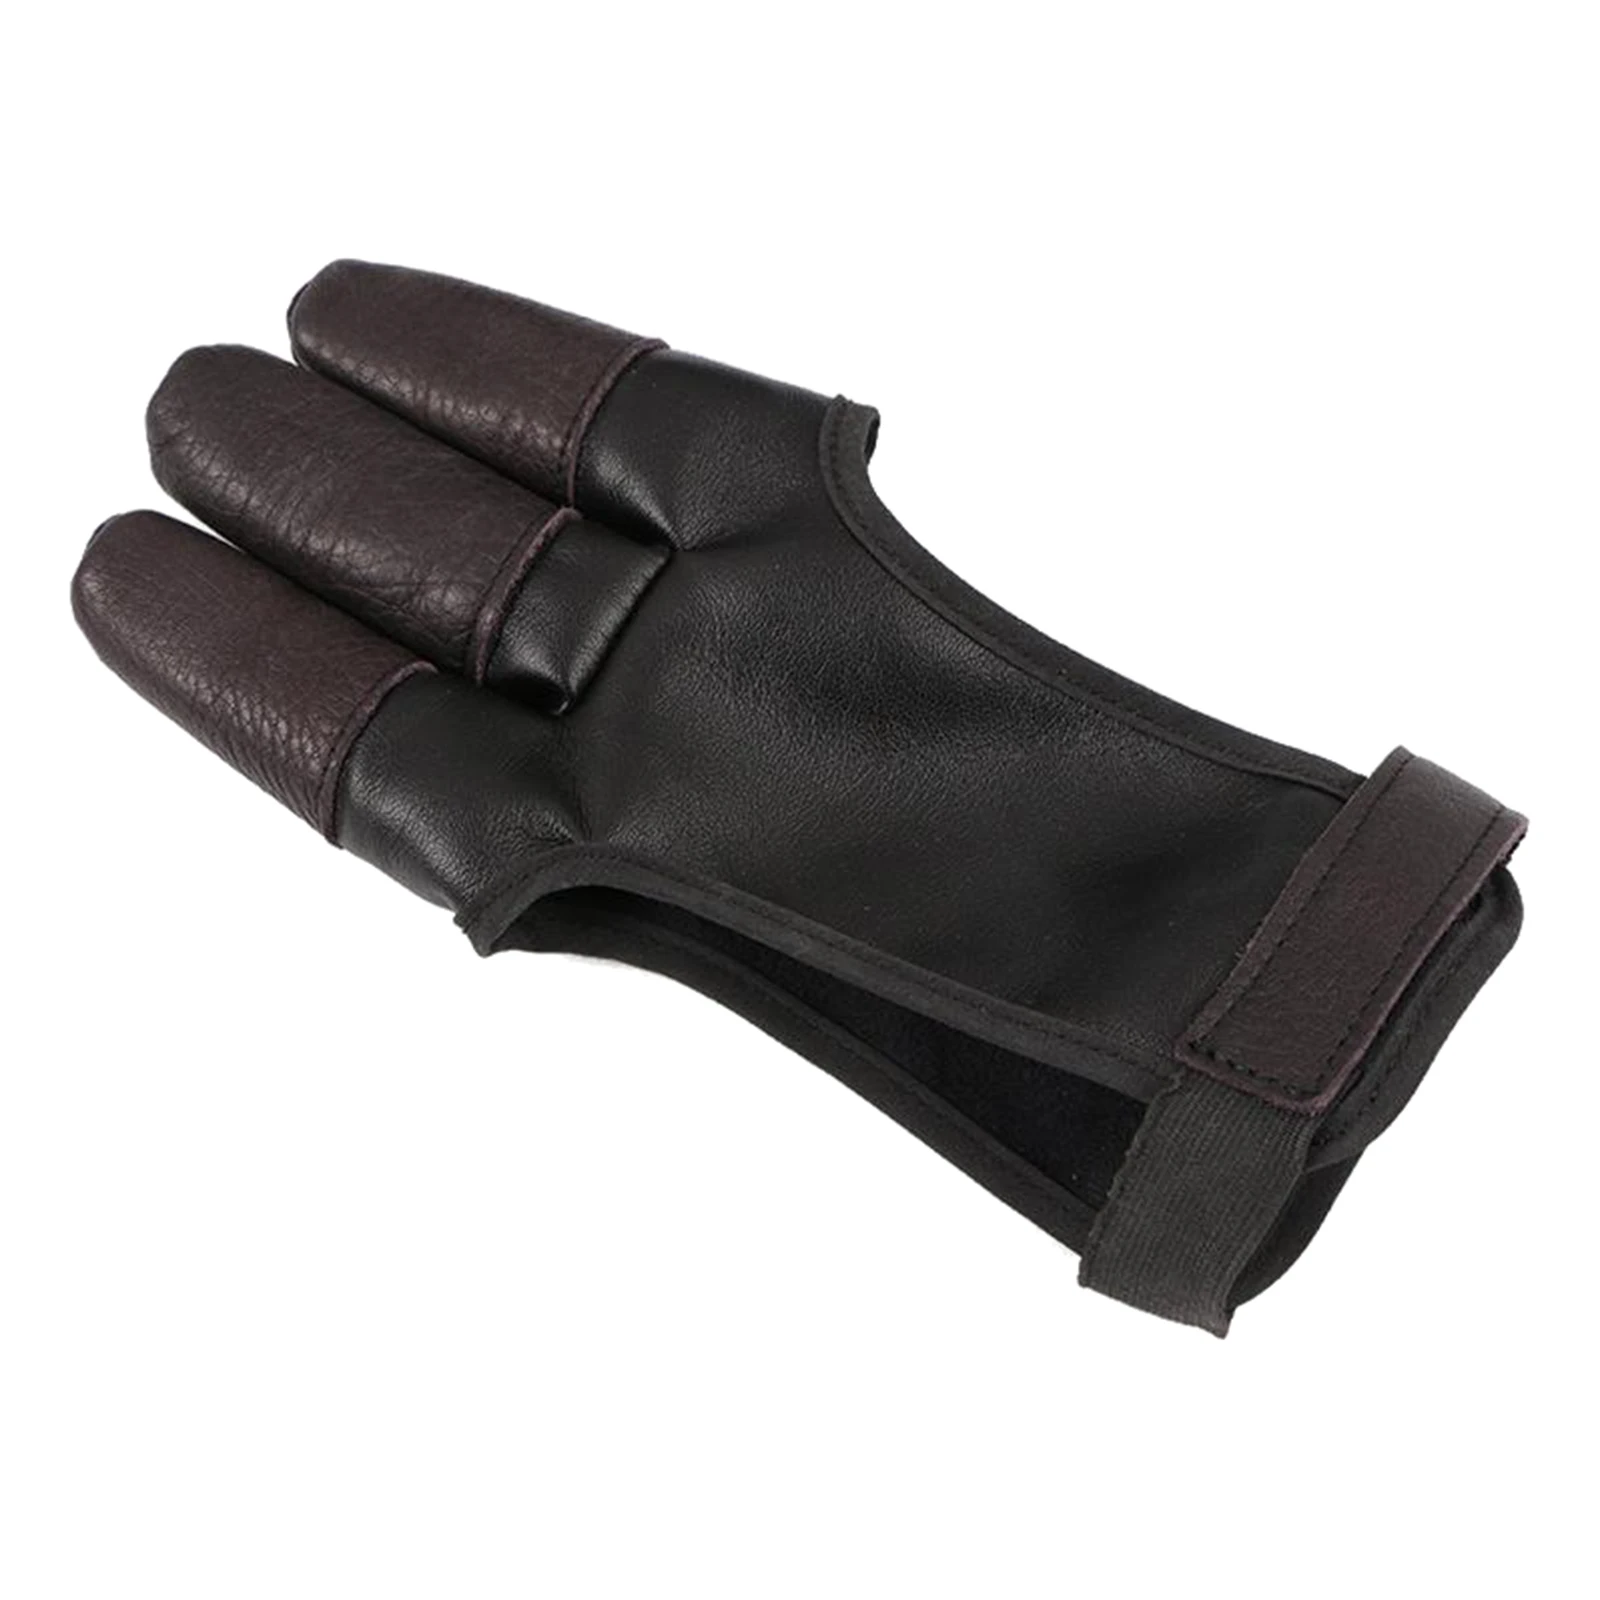 Non- Archery Glove 3-Finger Leather Archery Training Practicing Fingers Protective Gloves Shooting Gloves for Kids Adult